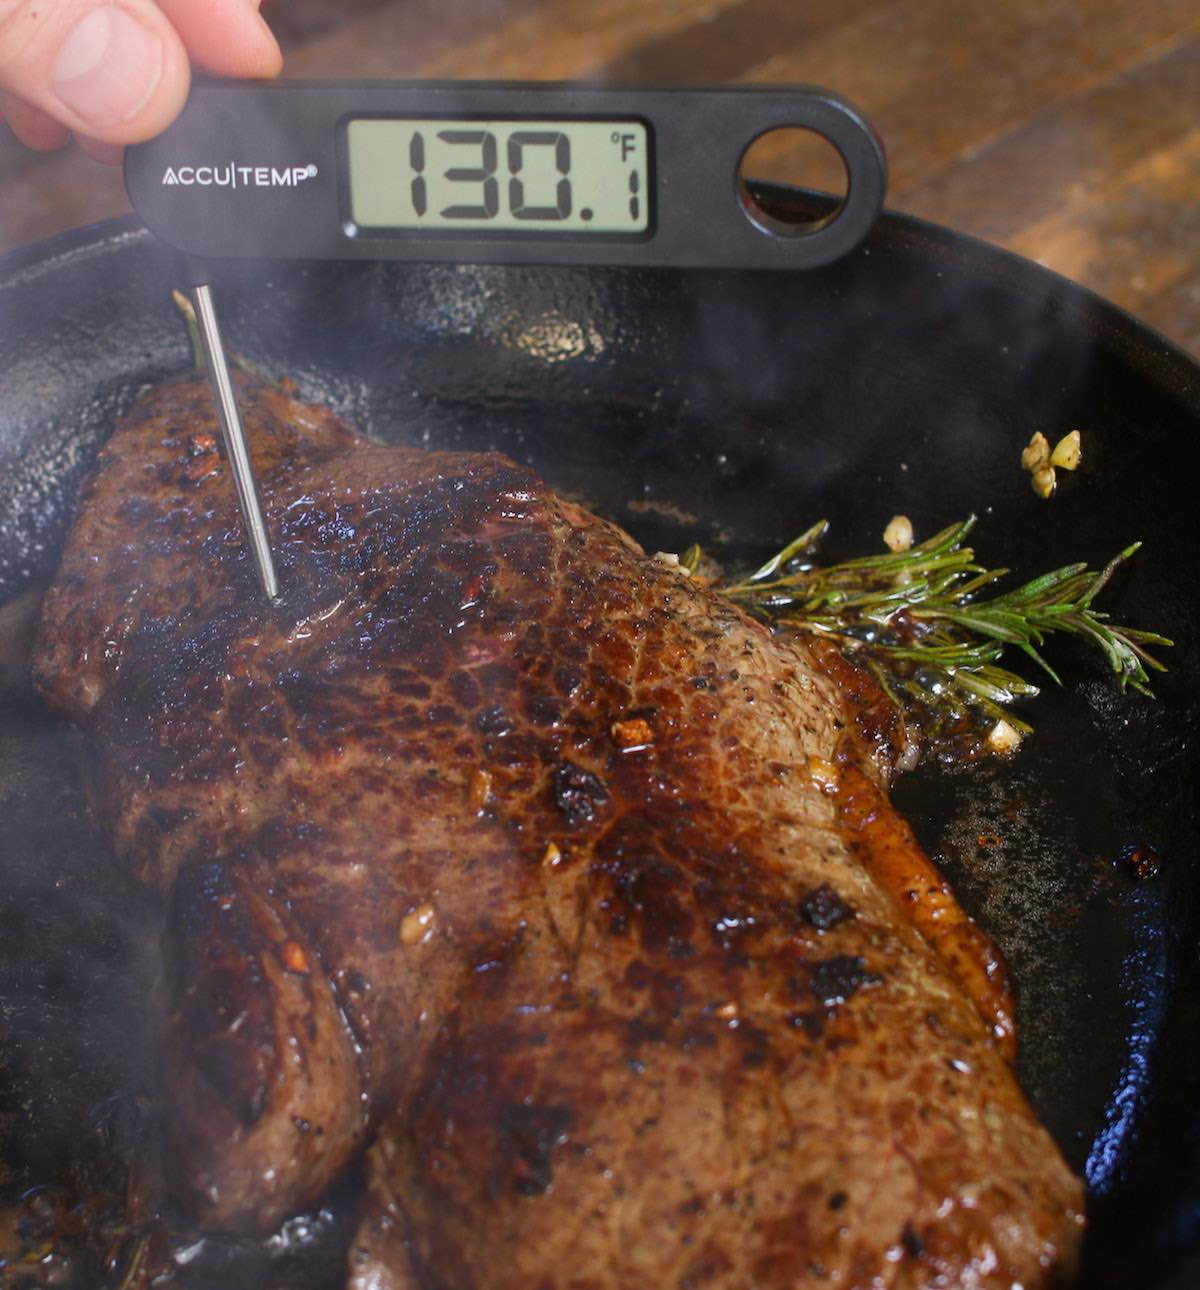 Checking doneness of a steak in a cast iron pan by inserting an instant-read thermometer into the thickest section of the meat. The reading of 130°F indicates medium doneness.